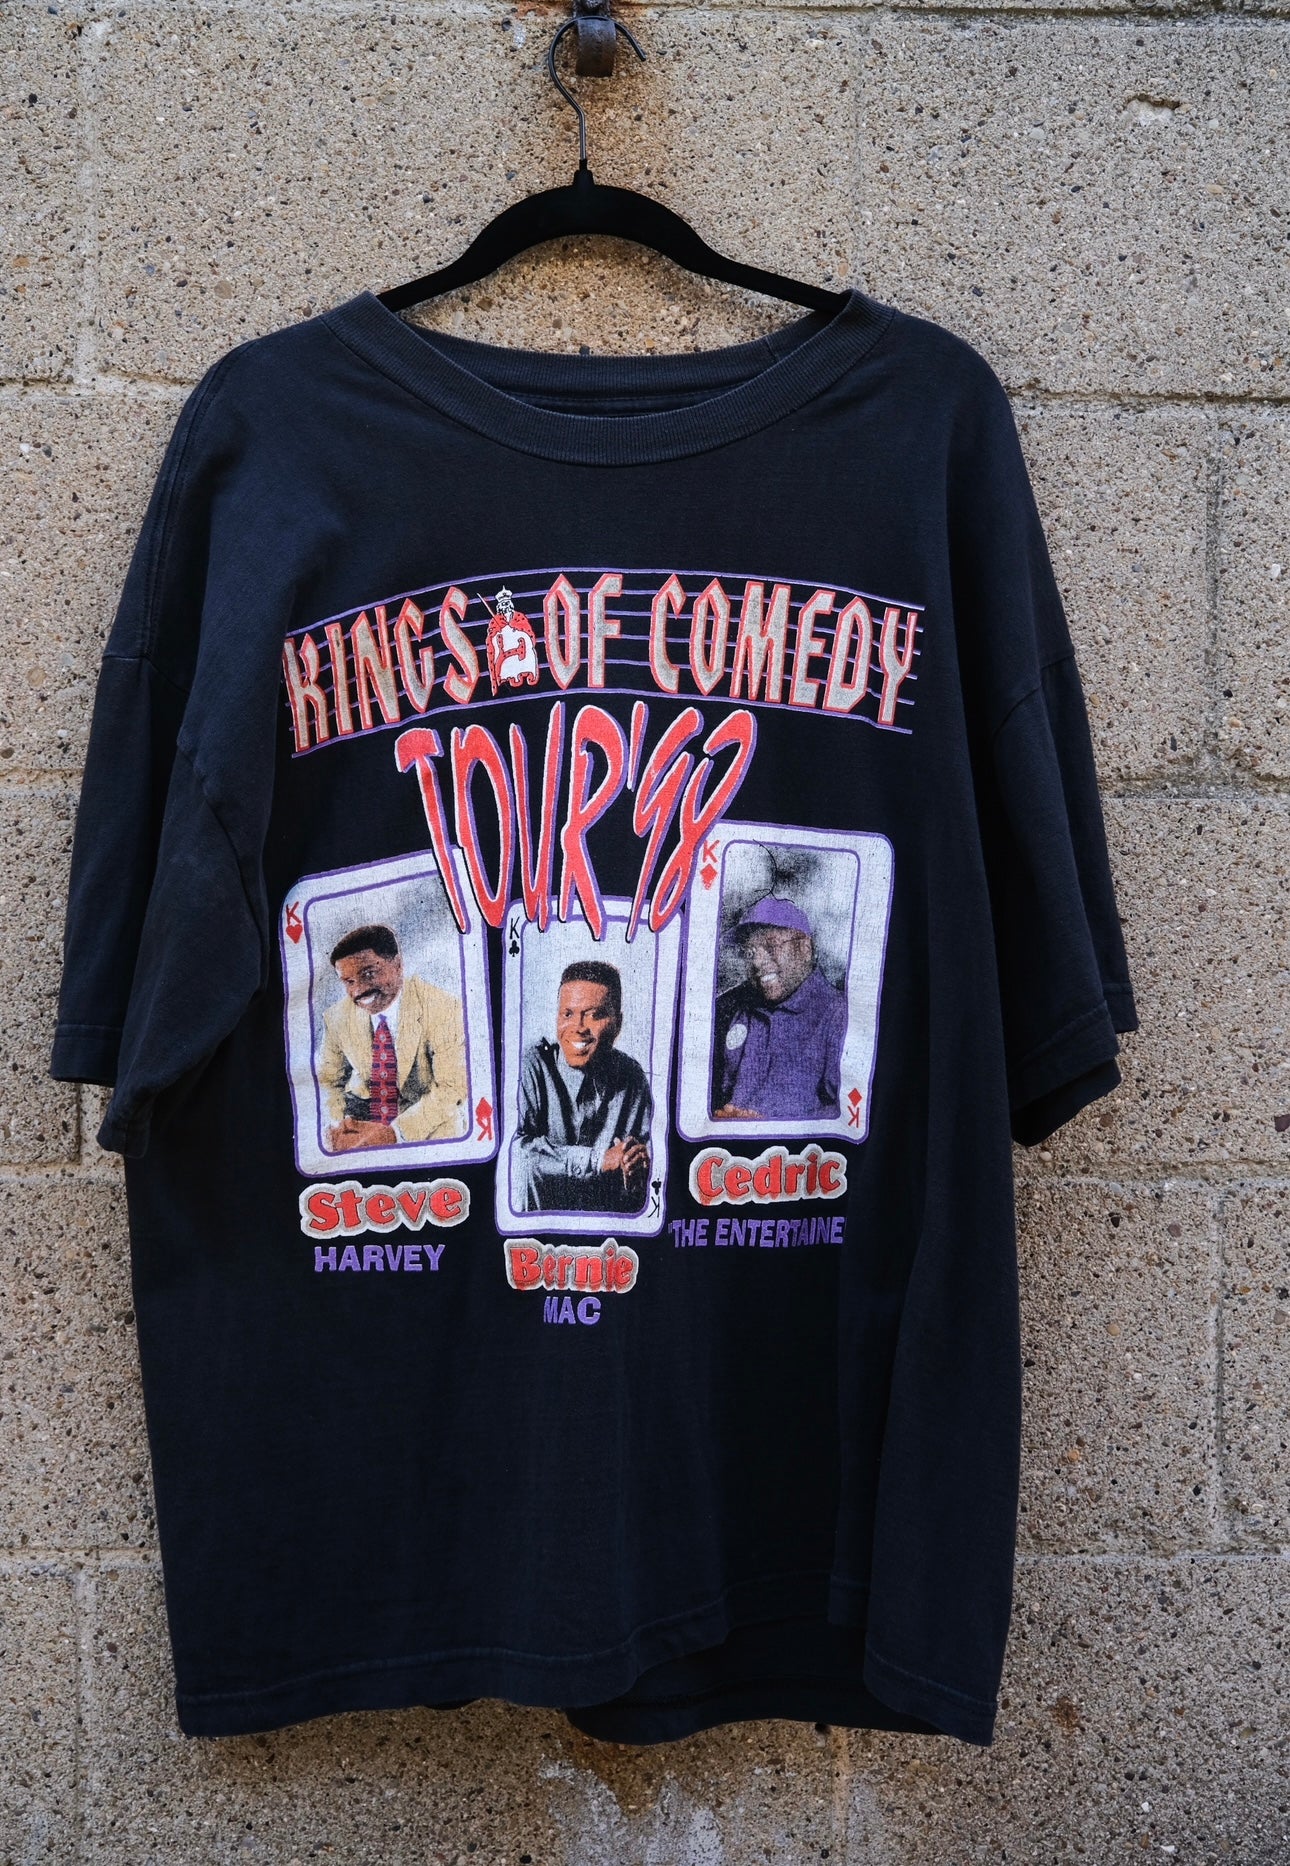 Kings Of Comedy Tour 1998